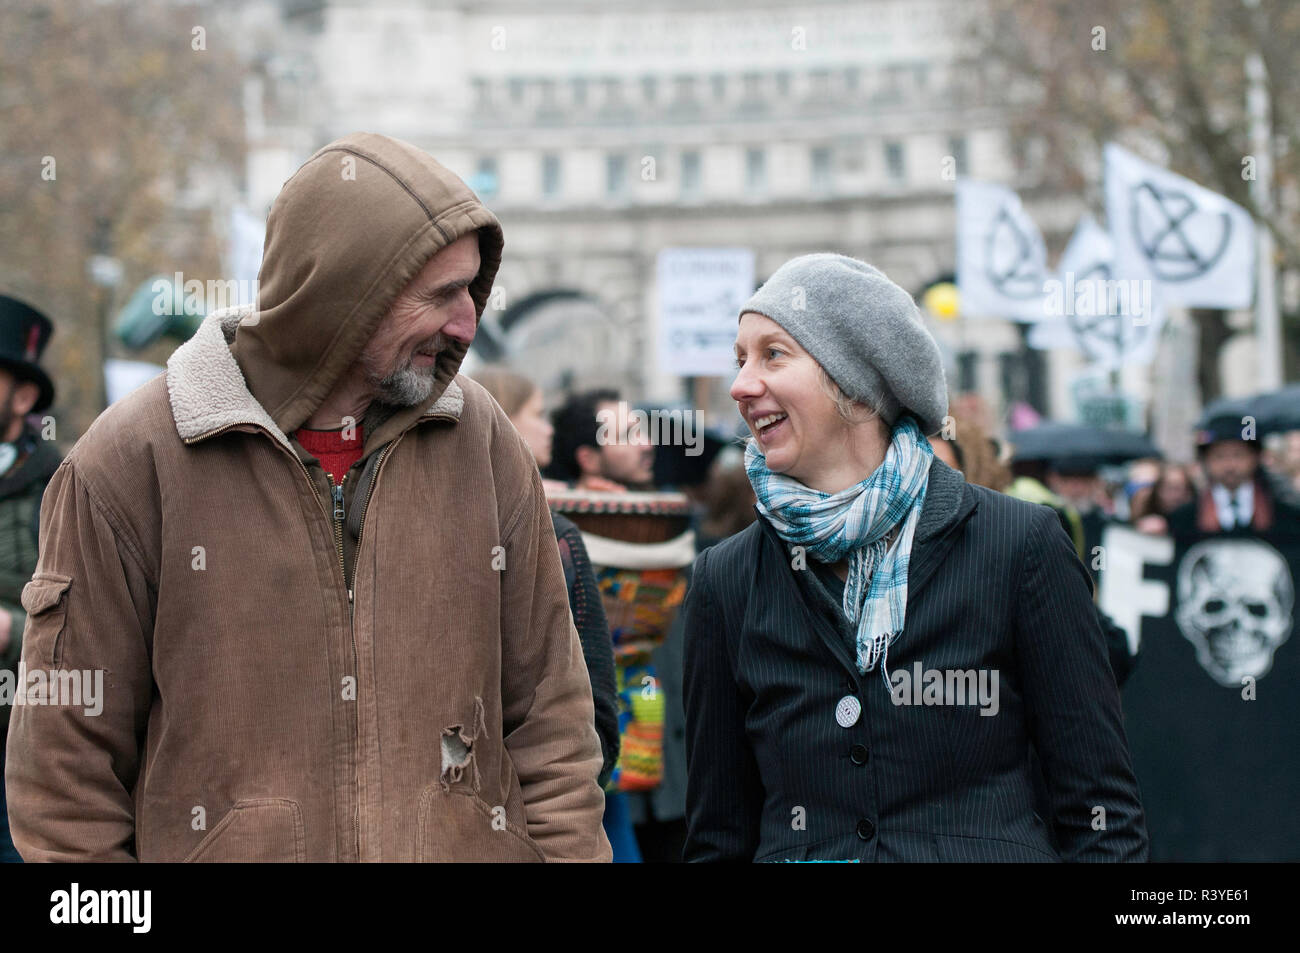 Extinction Rebellion campaigners Roger Hallam (Left) and Dr Gail Bradbroock (Right) seen at the front of the march.  Thousands of demonstrators from the new Extinction Rebellion climate change movement gathered at Parliament Square for a memorial and funeral march through London. Demonstrators paid homage to the lives lost due to climate change, and marched carrying a coffin from Parliament Square to Buckingham Palace. Stock Photo